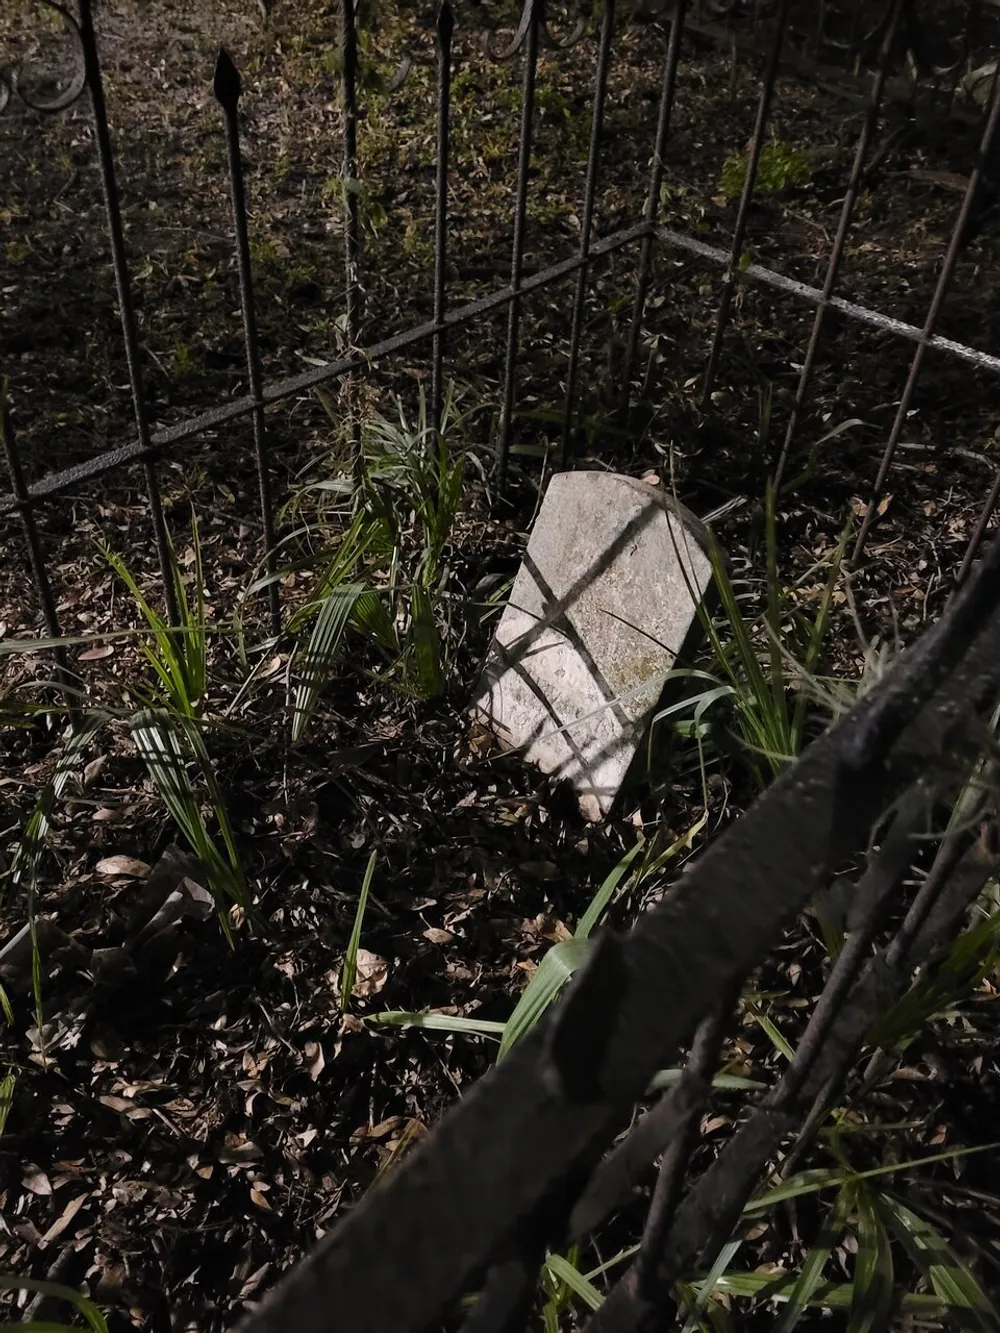 A toppled gravestone lies inside a weathered metal fence surrounded by foliage and ground cover